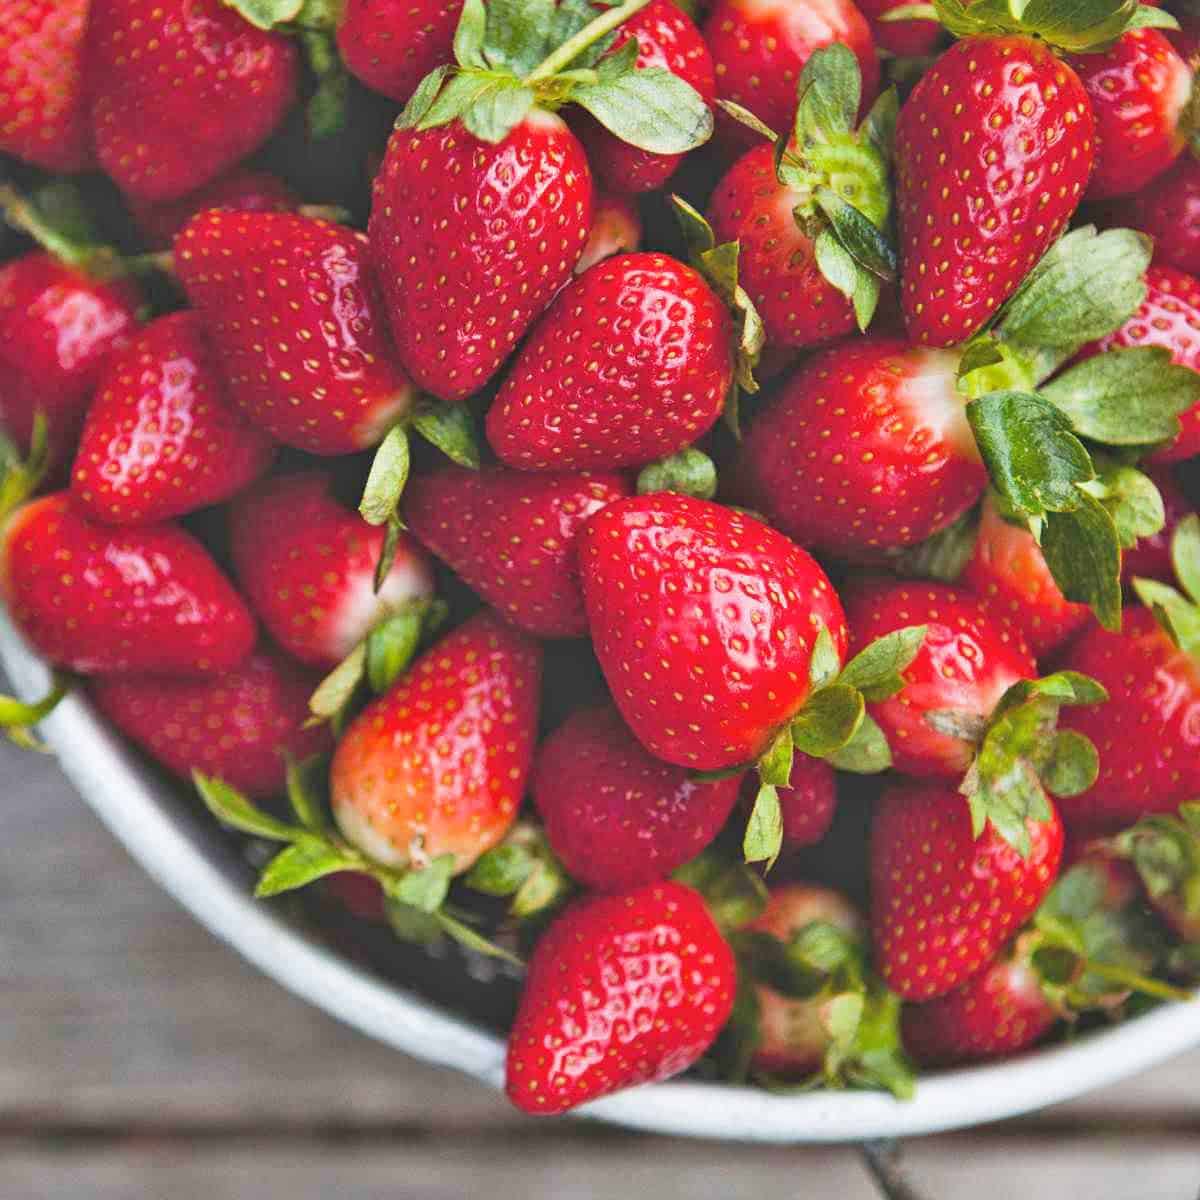 A metal strainer filled with fresh strawberries.